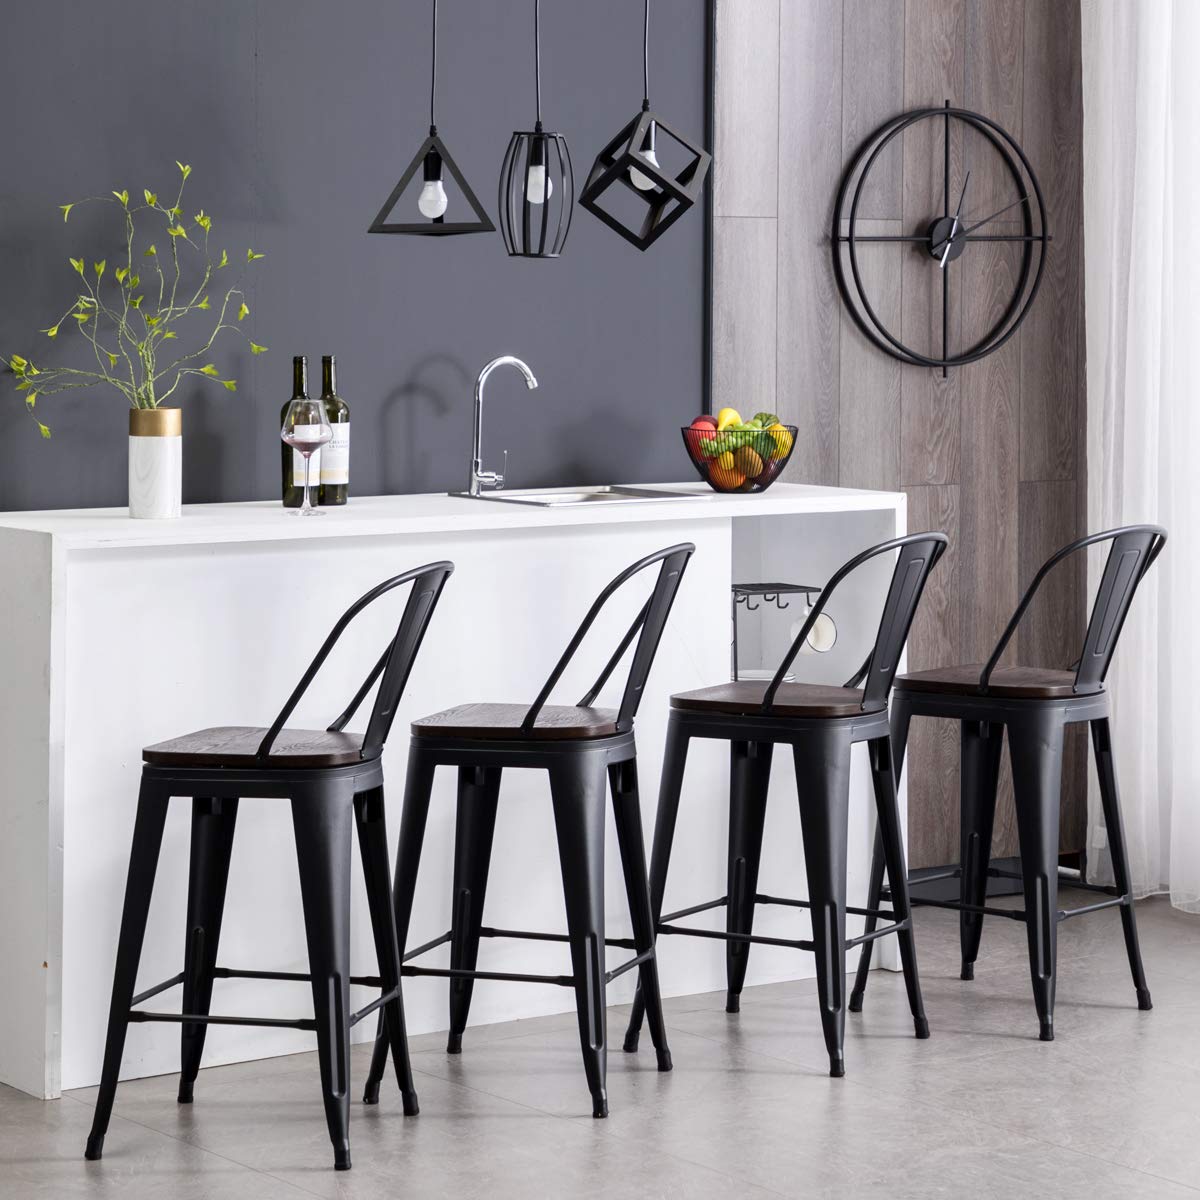 HAOBO Home 26" High Back Metal Counter Stool Height Bar Stools with Wooden Seat [Set of 4], Black